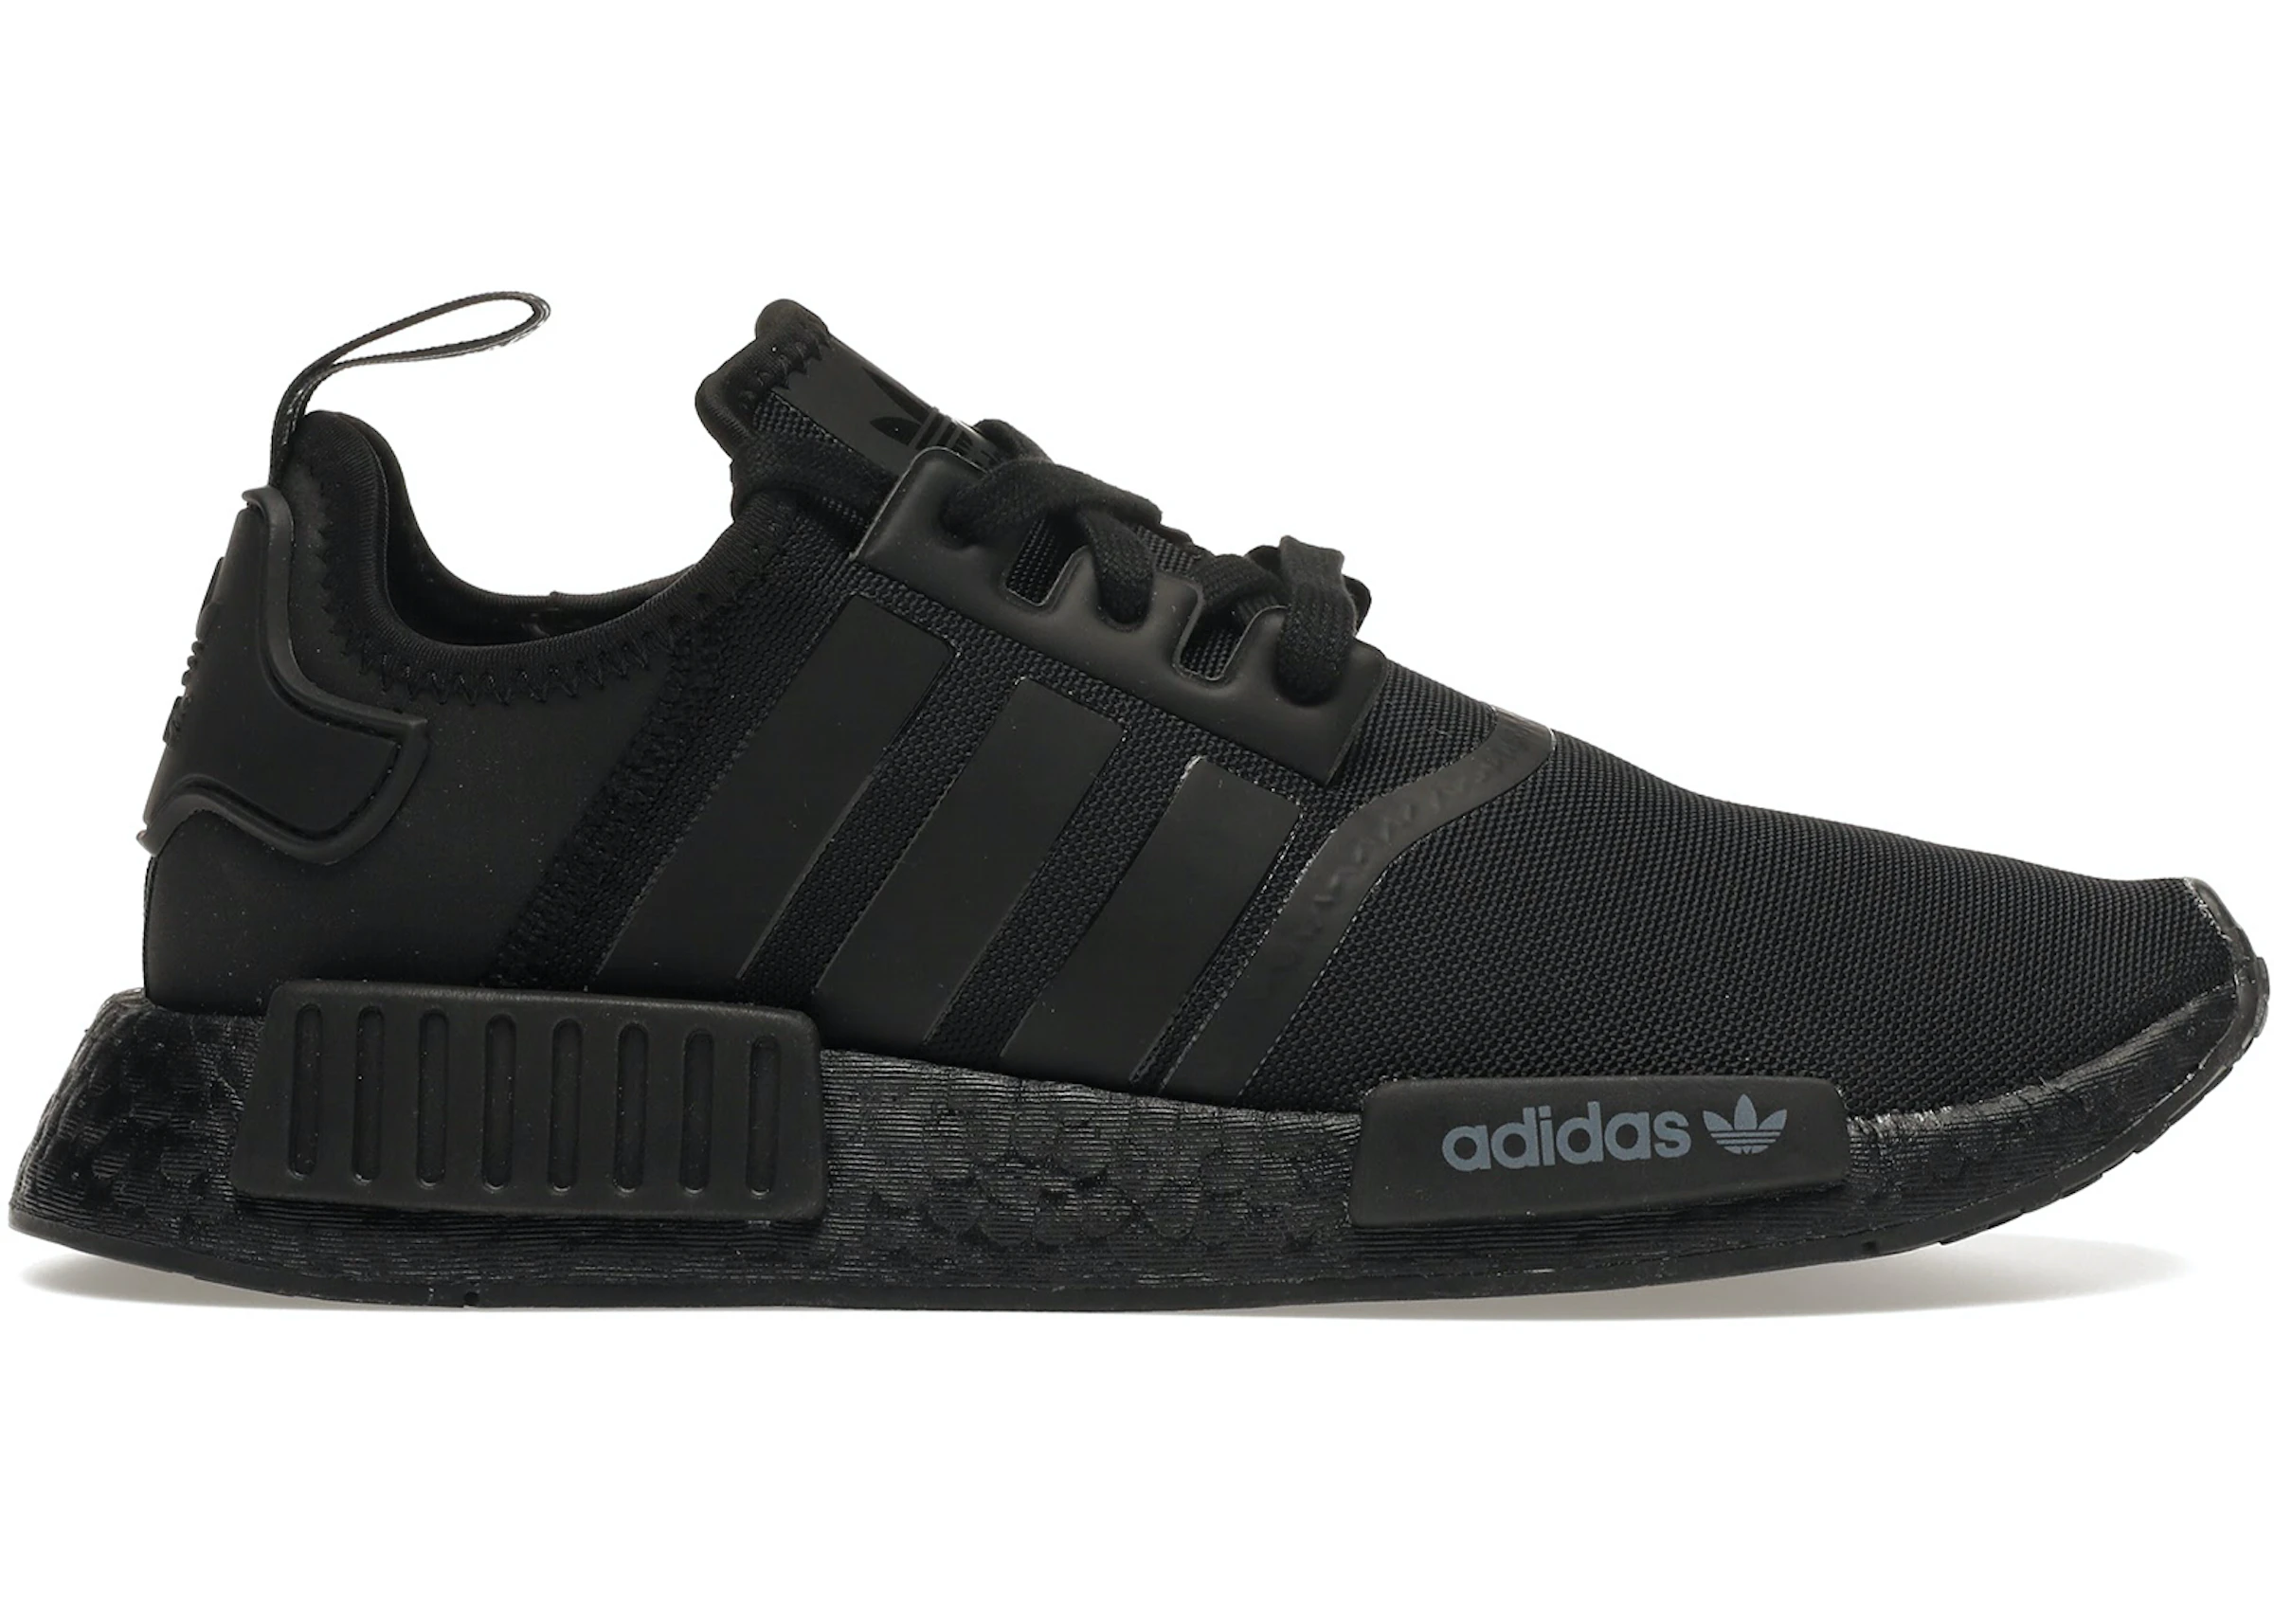 adidas NMD - Sizes & Colorways at